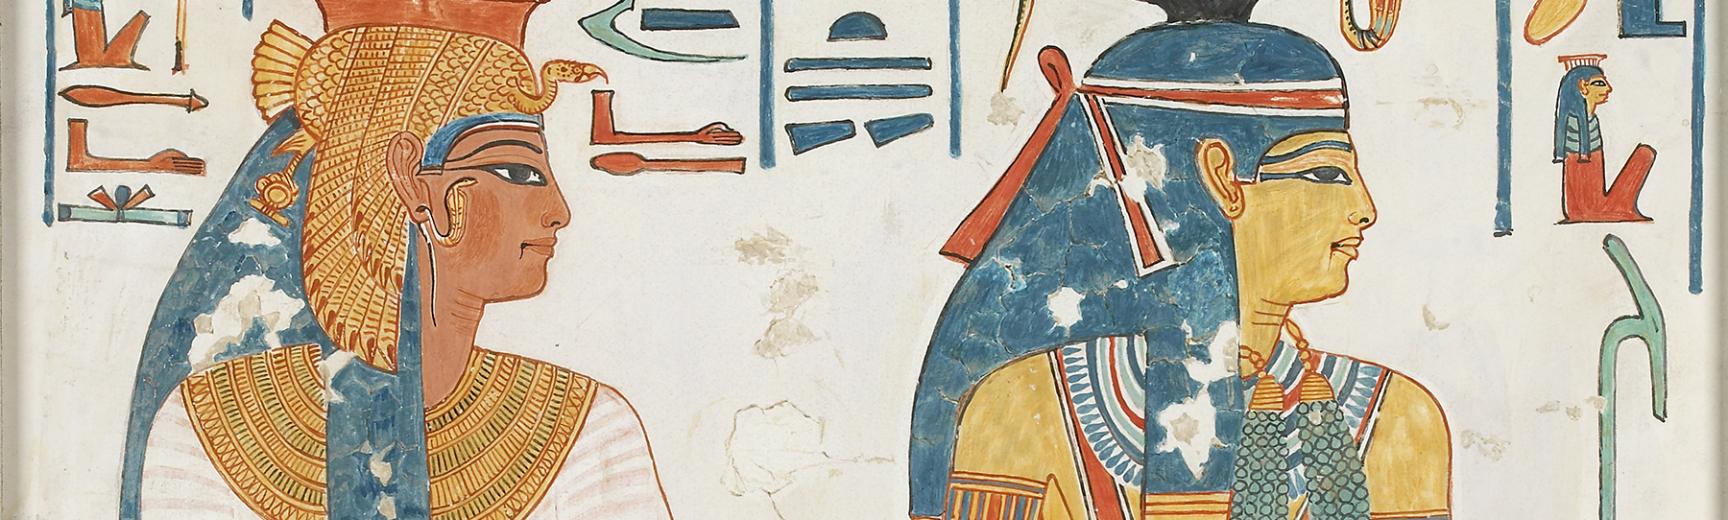 Copy of a wall painting from the Queen Nefertari's tomb by Nina de Garis Davies 